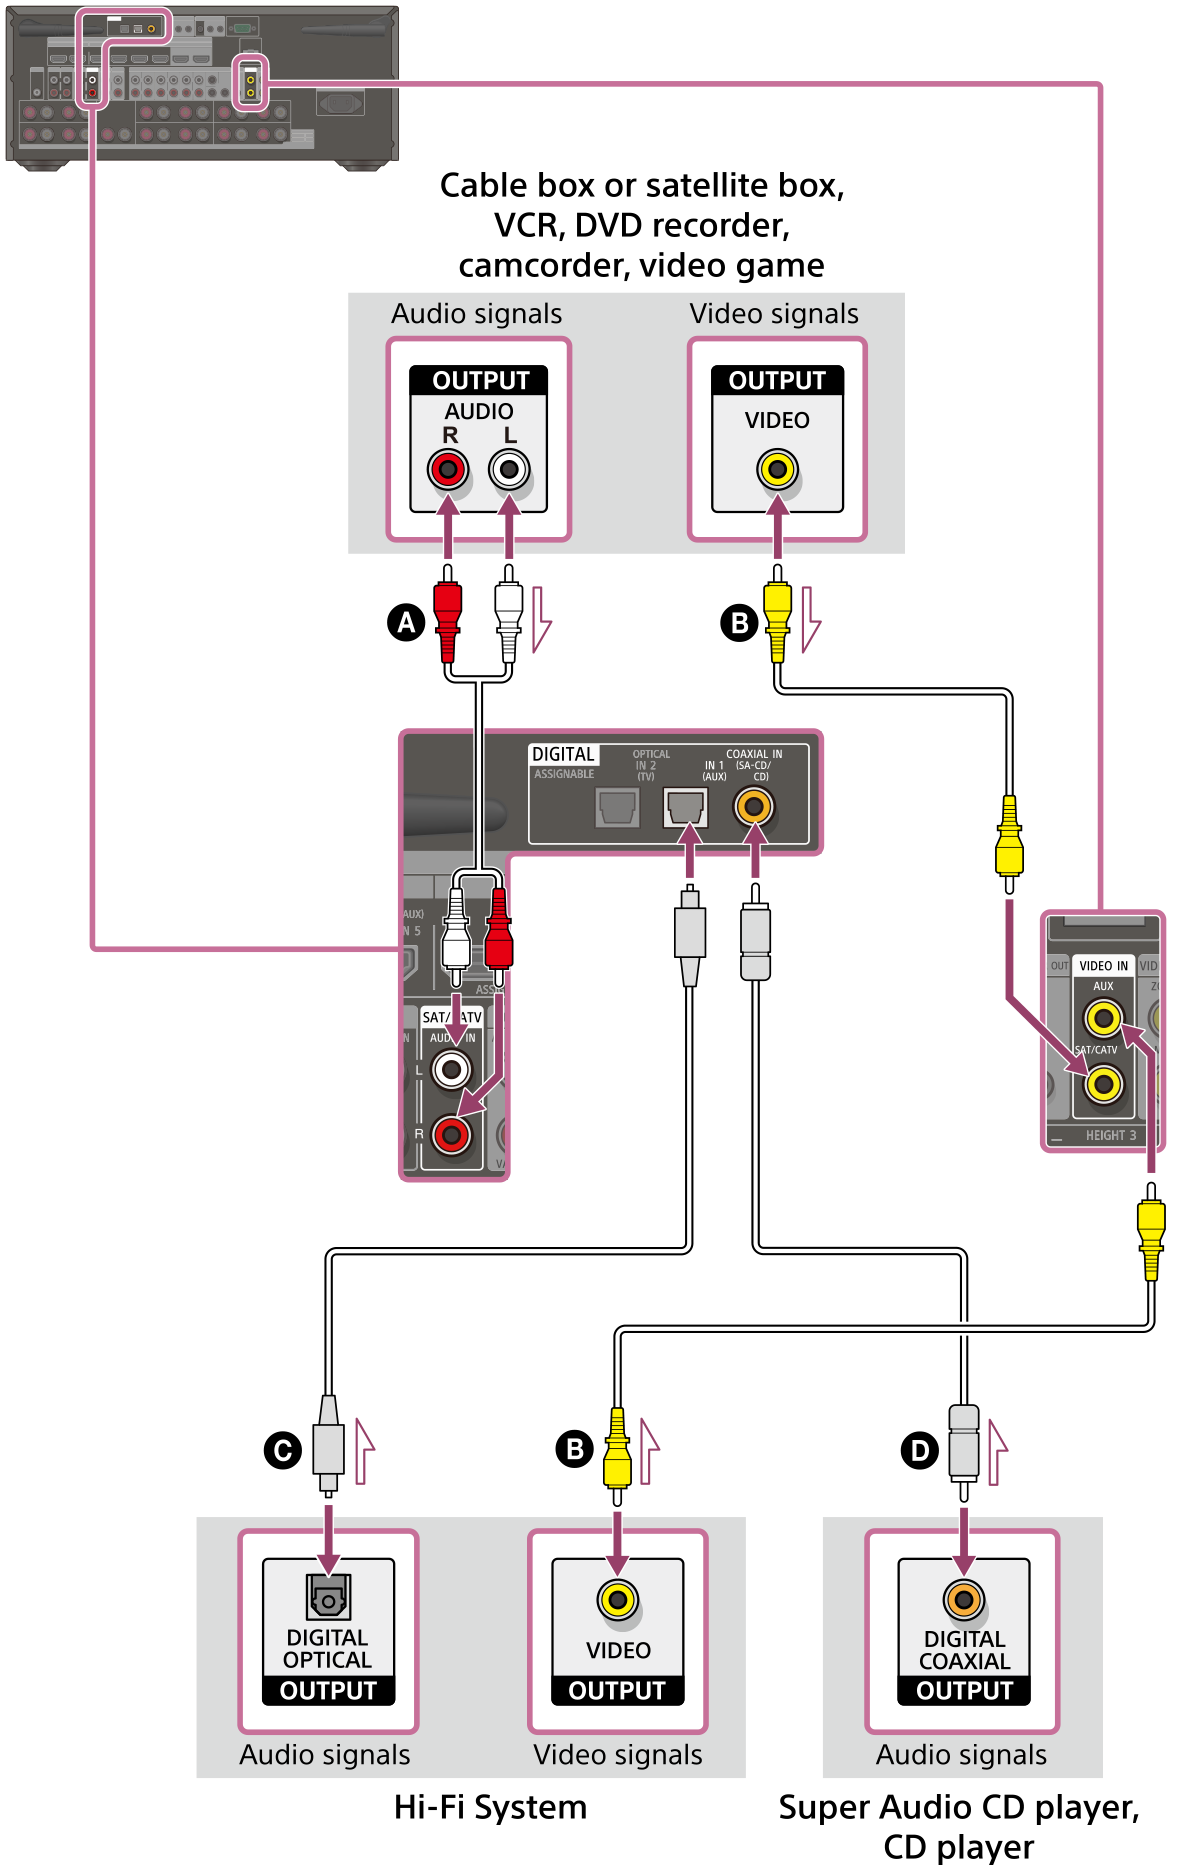 Illustration of connecting the receiver and devices using the video and audio cables. The VIDEO IN and AUDIO IN jacks of the receiver are labeled with input names. Use the VIDEO IN and AUDIO IN jacks marked with the same names in combination. For devices with DIGITAL COAXIAL OUTPUT jacks, we recommend using a coaxial digital cable instead of an audio cable for connection. In this case, connect the COAXIAL IN (SA-CD/CD) jack on the rear of the receiver with the DIGITAL COAXIAL OUTPUT jack on the rear of the device using a coaxial digital cable (not supplied).